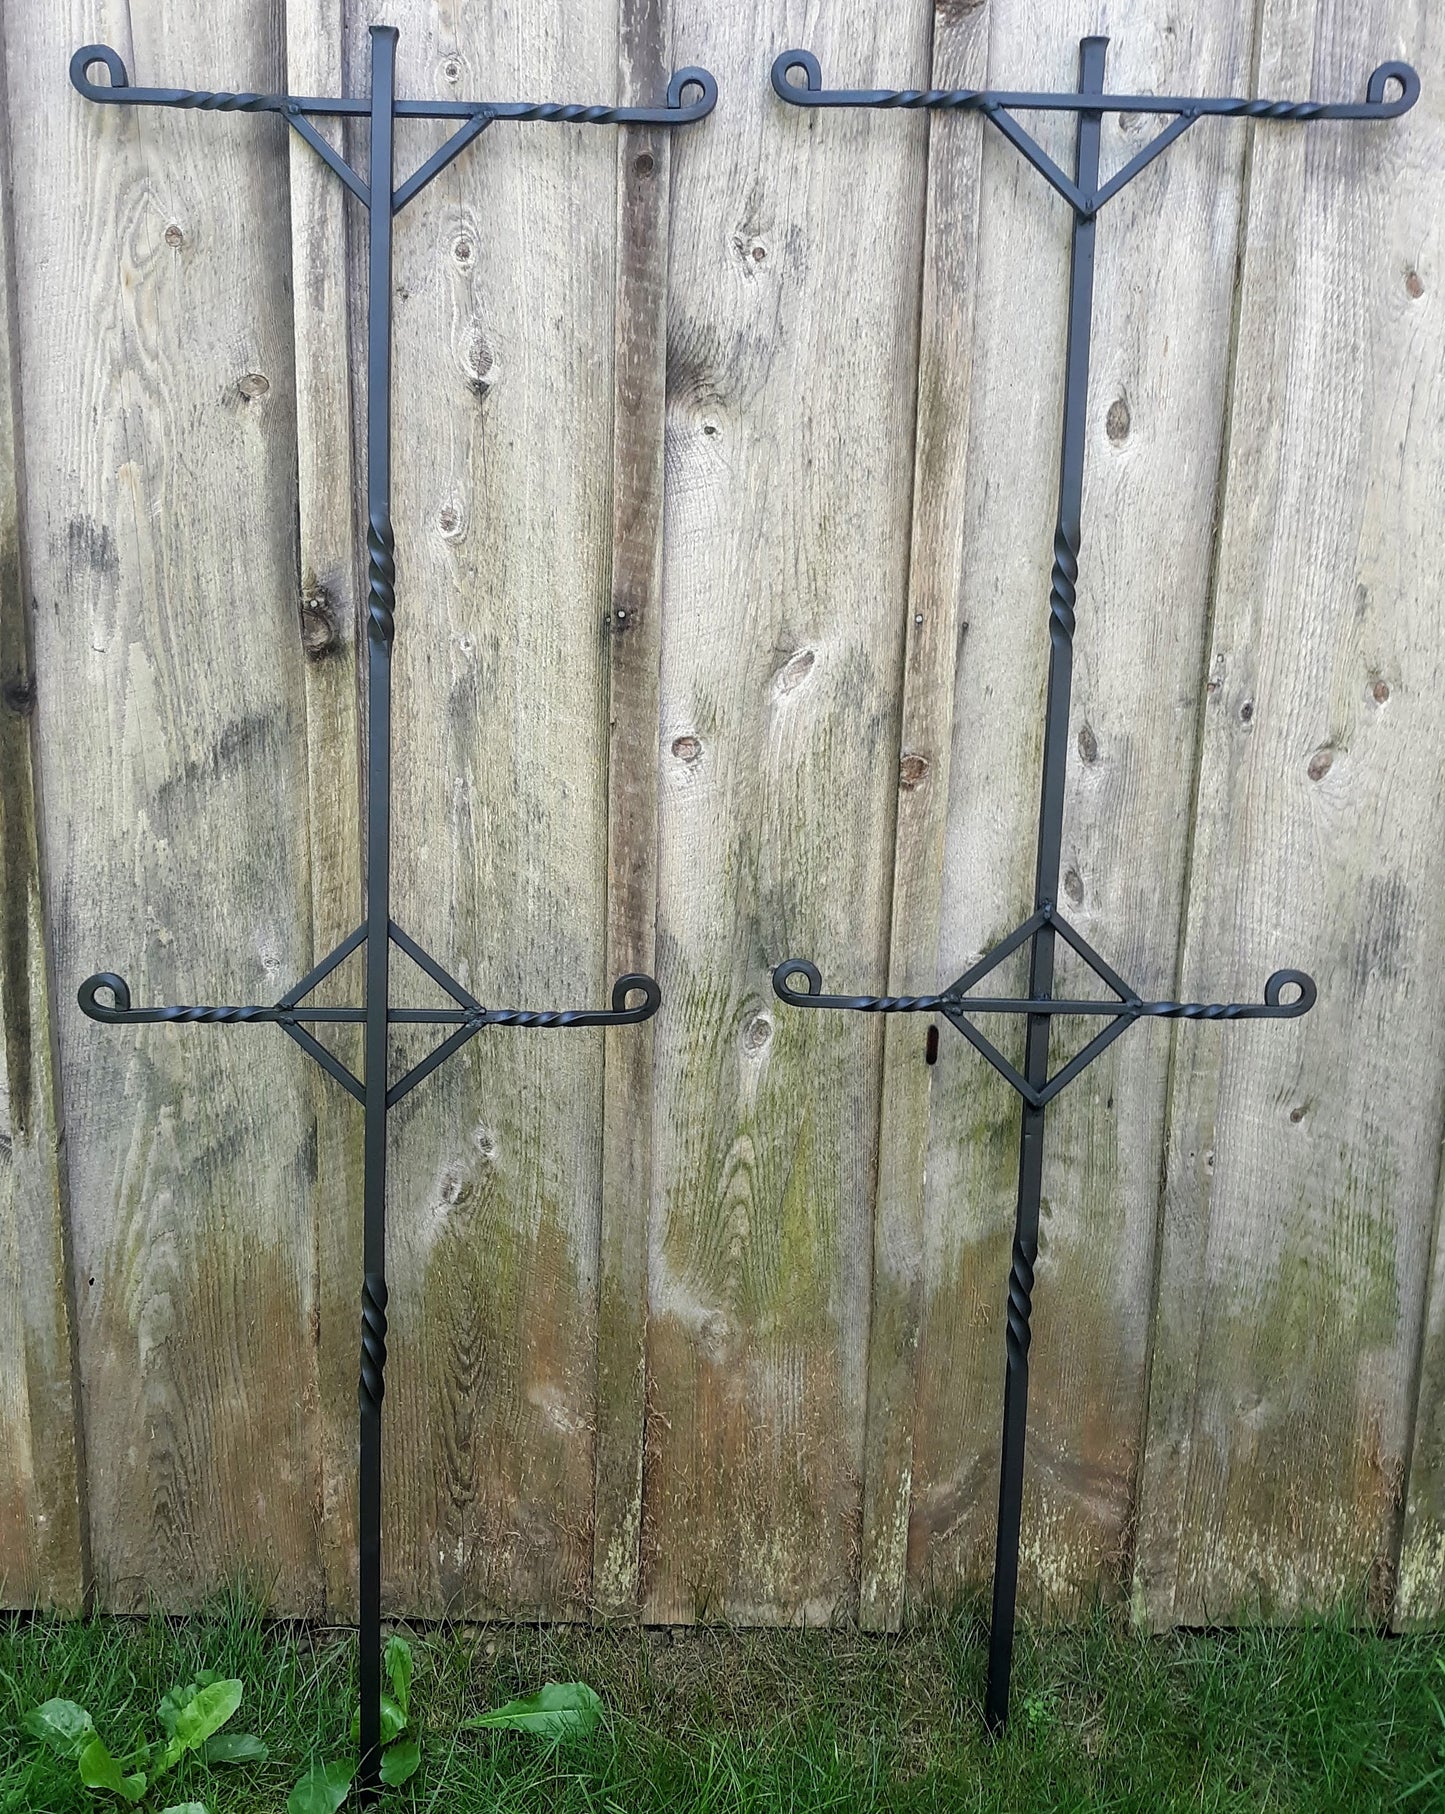 Two black hand forged trellis supports against a barnwood background.  Eah will hold up to 4 strands of trellis wire or rope.